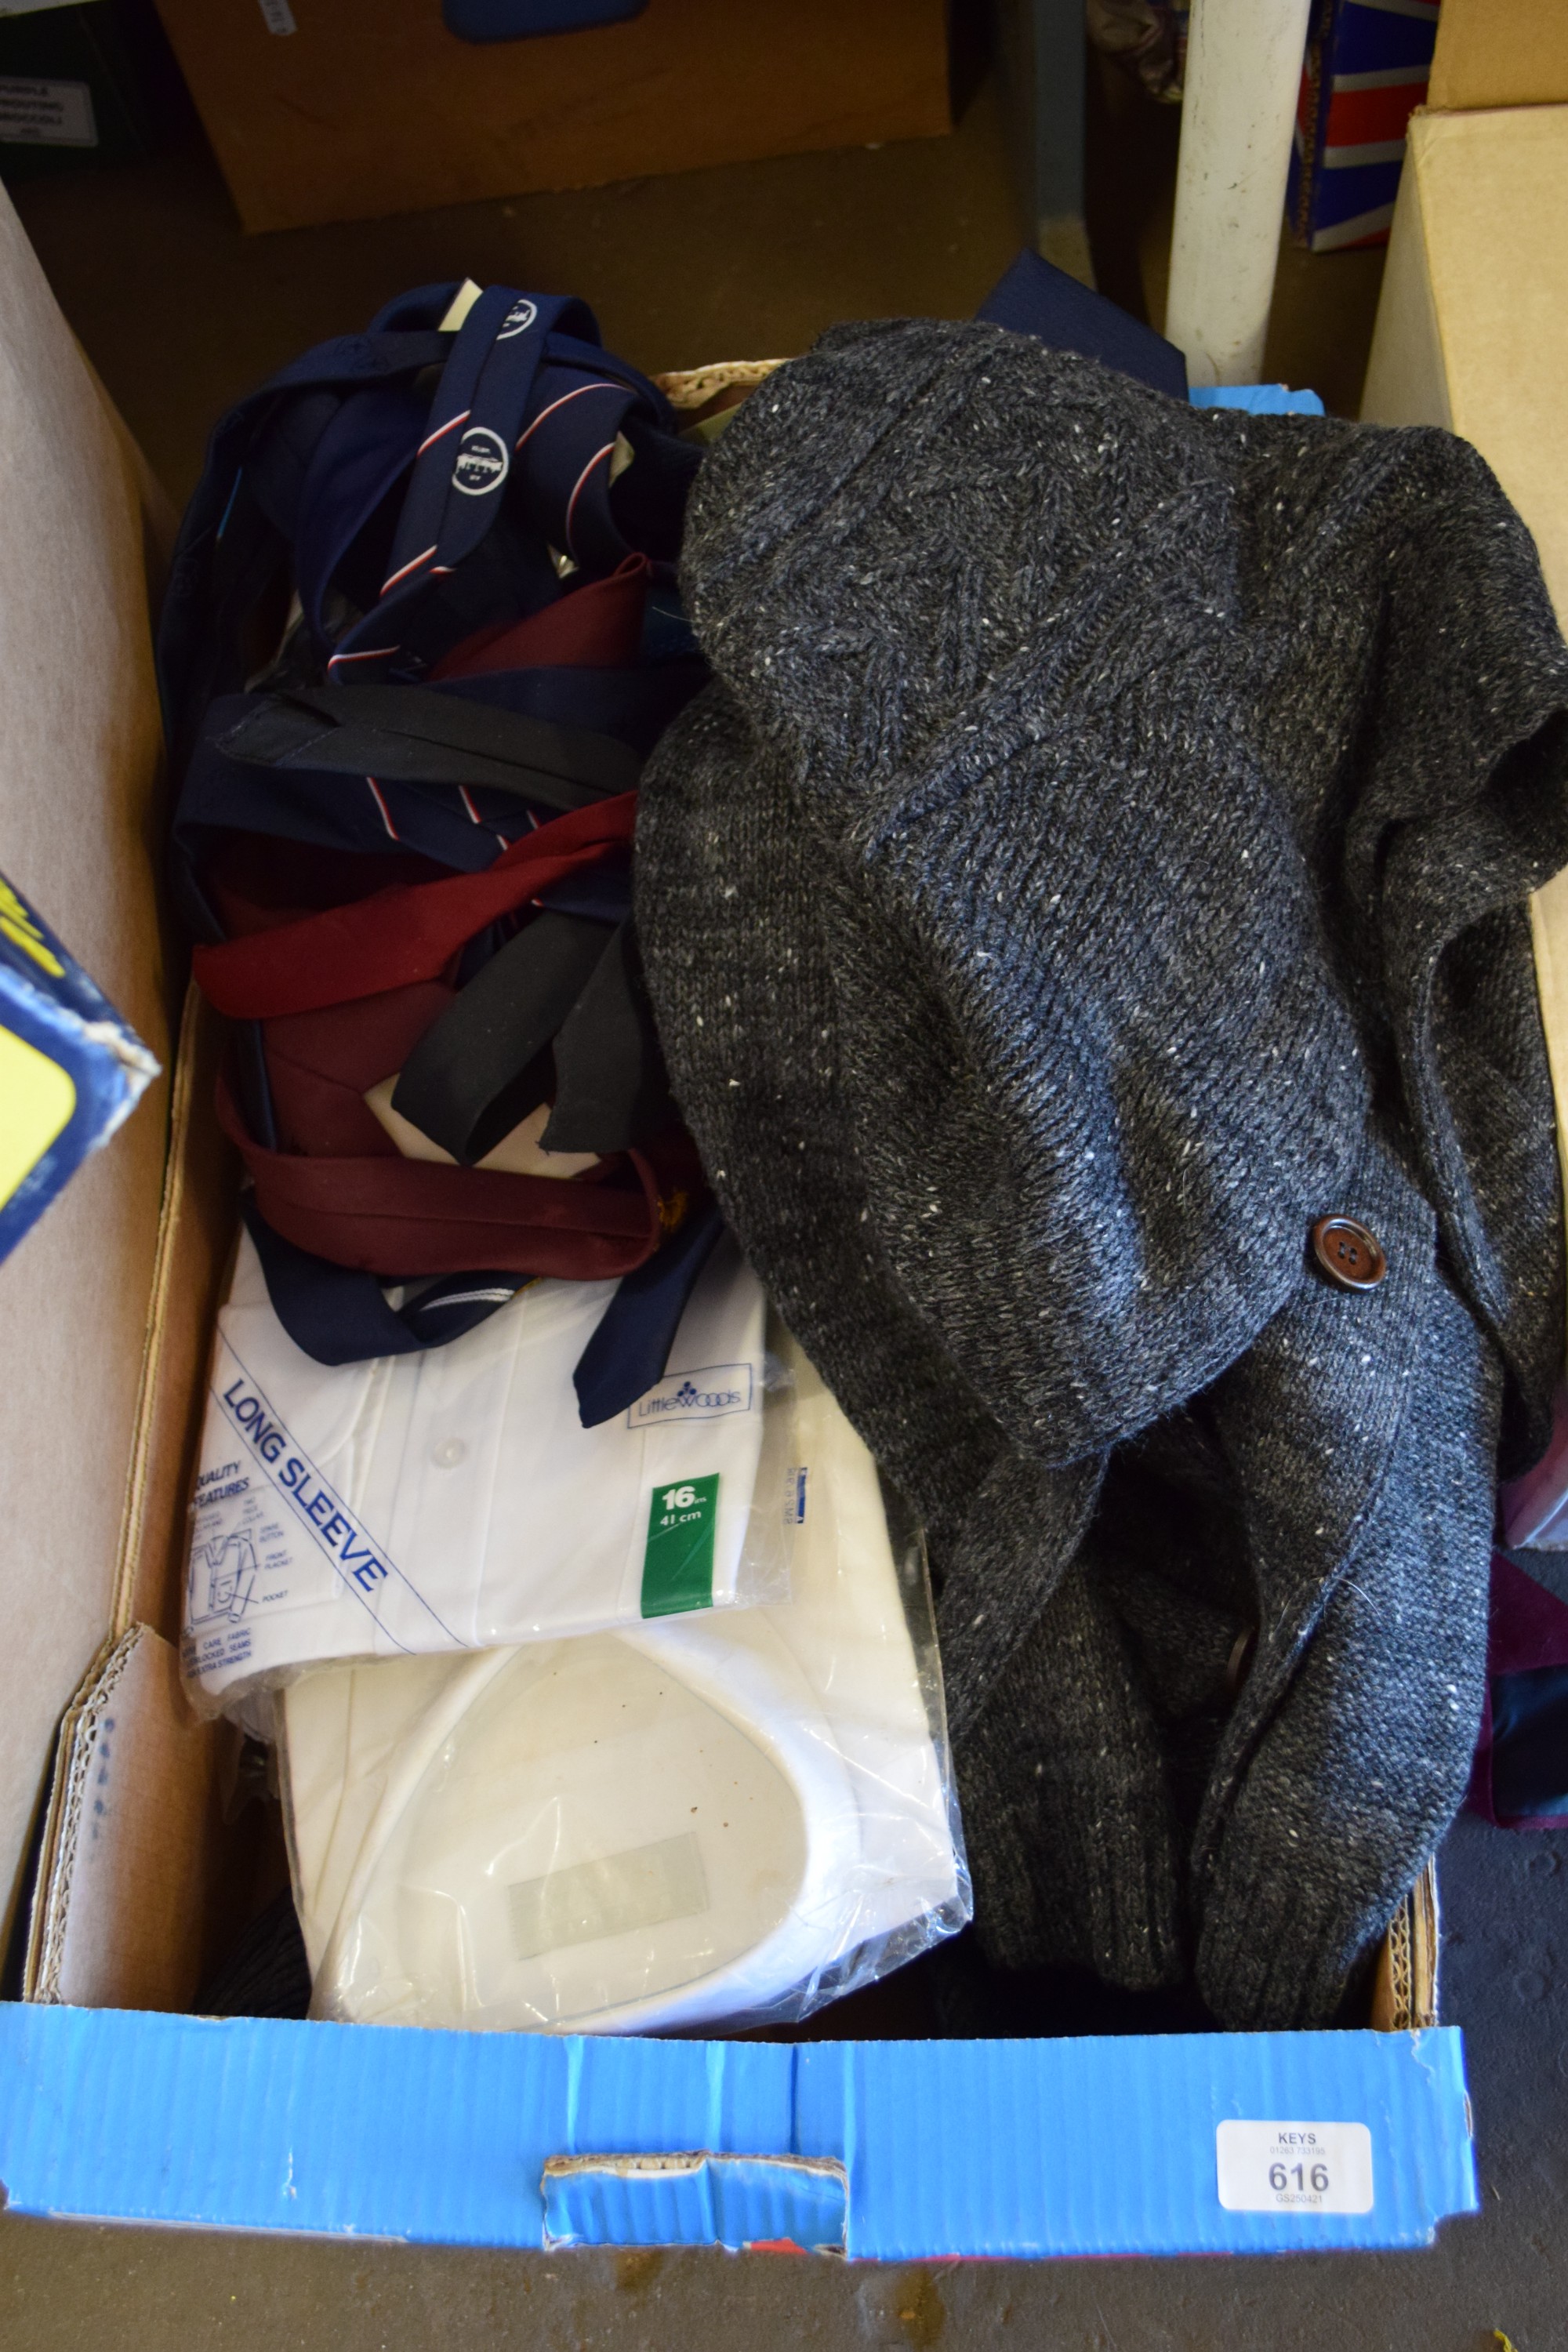 BOX OF VARIOUS MENS CLOTHING TO INCLUDE TIES, PACKAGED SHIRTS ETC